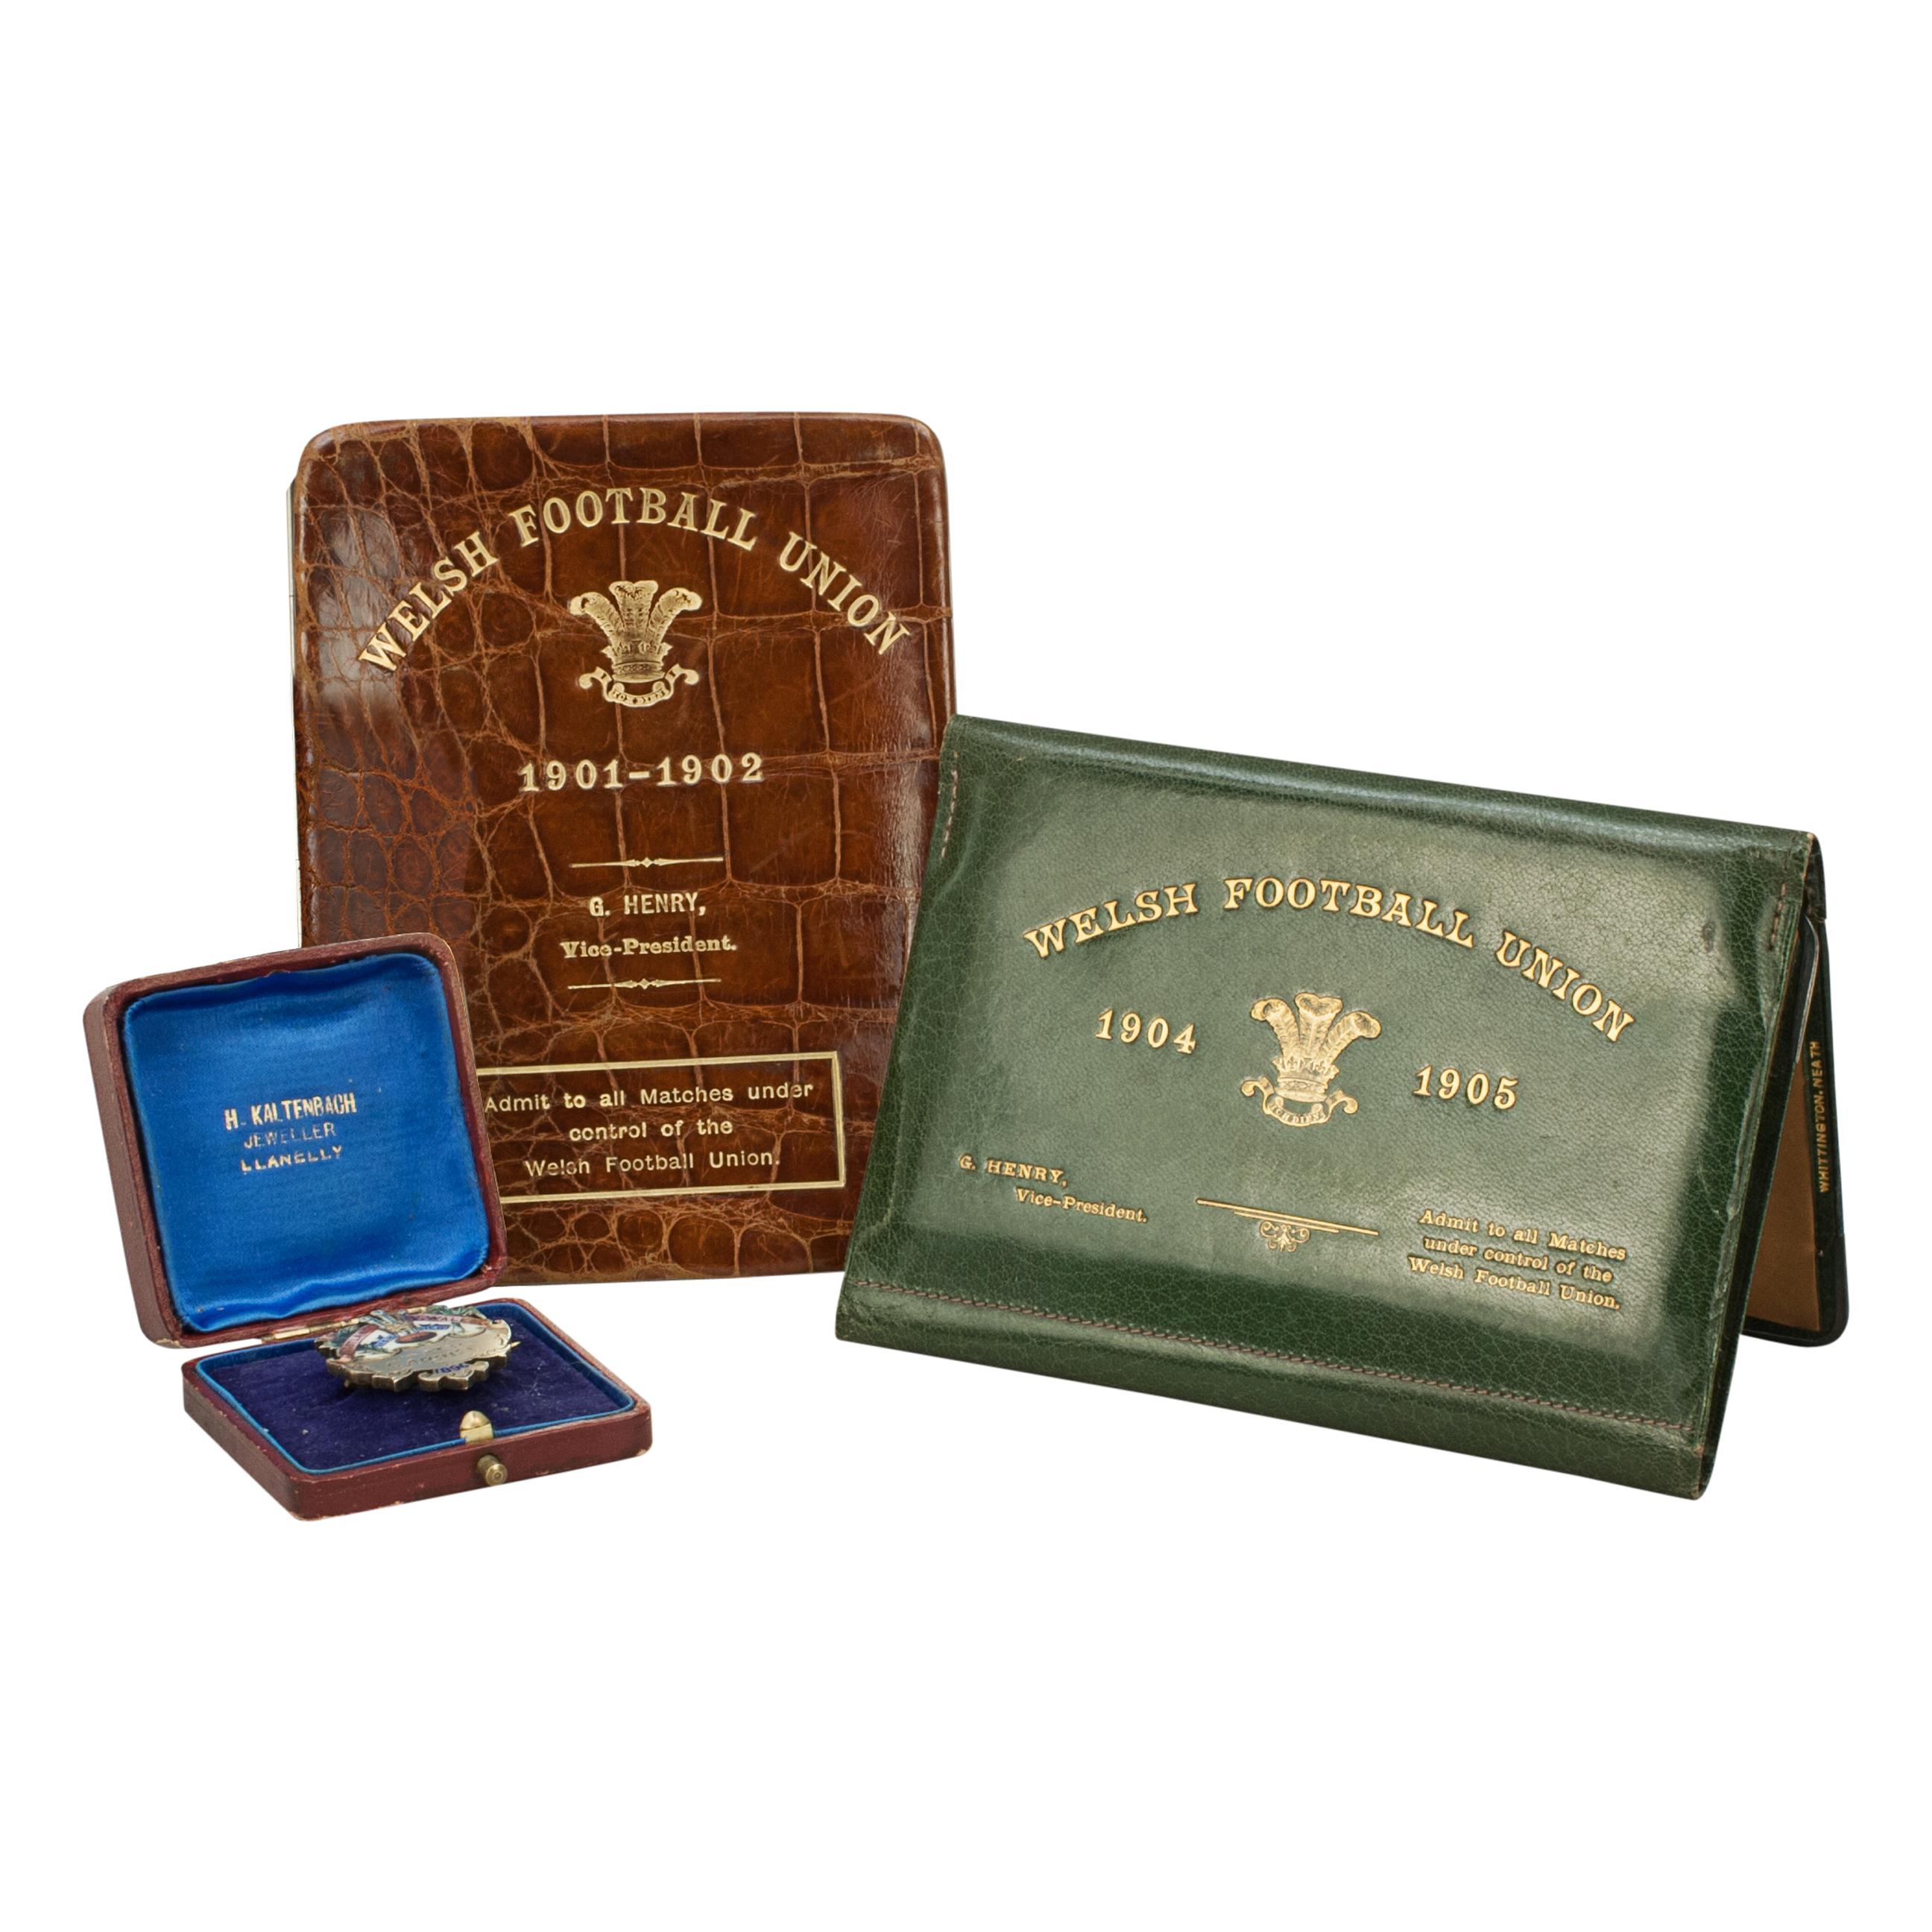 Three Rare Items Once belonging To The Welsh Rugby Union Vice-President, G. Henry.
These wonderful rare items belonged to the Welsh Rugby Union Vice-President, G. Henry and comprise of a 1896 lapel-pin (medal), leather crocodile wallet (season